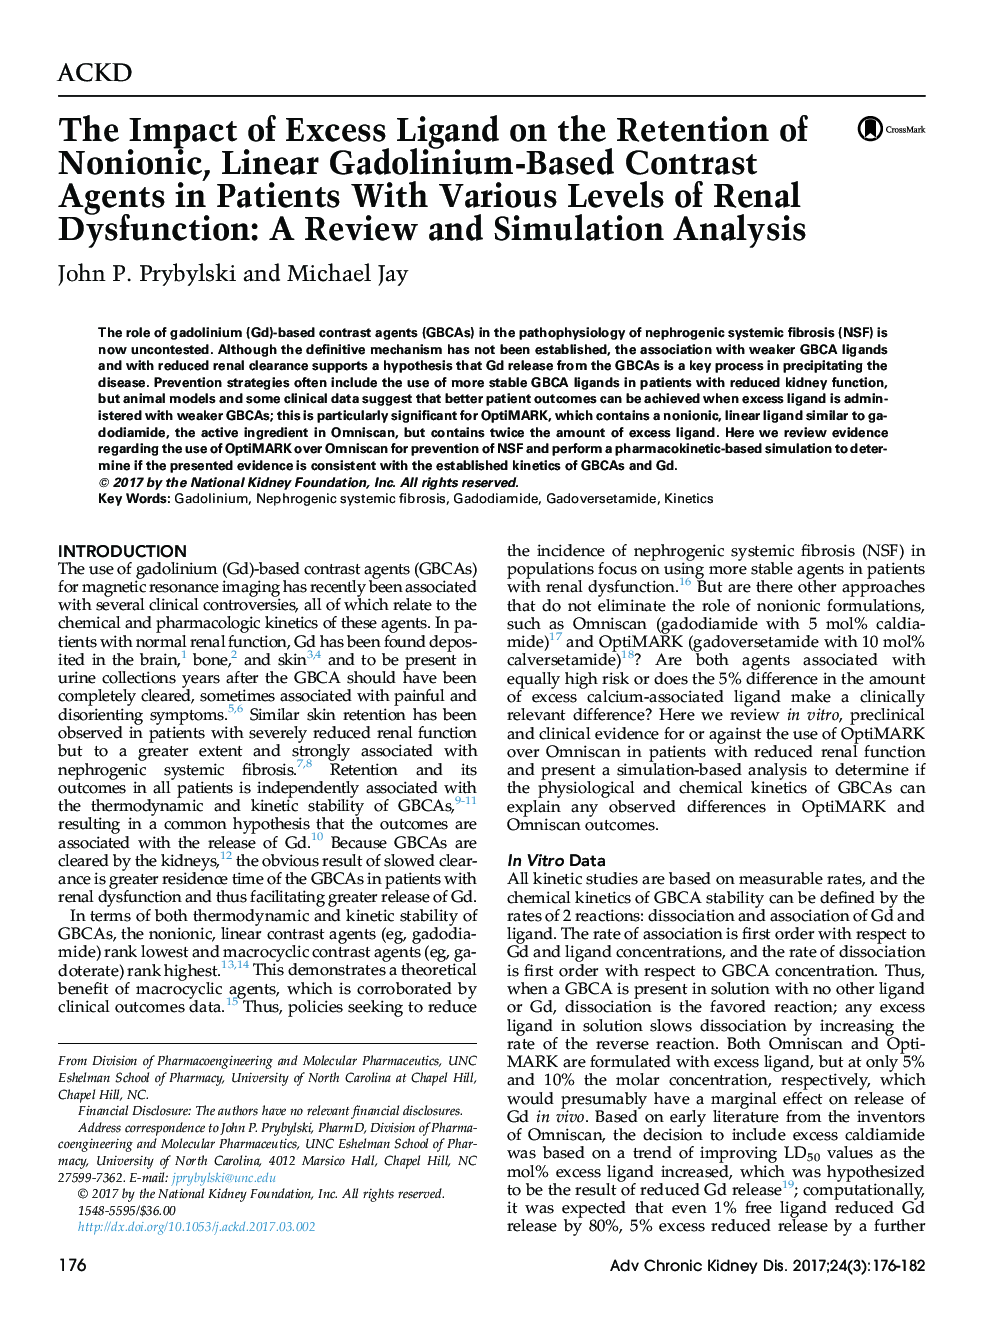 The Impact of Excess Ligand on the Retention of Nonionic, Linear Gadolinium-Based Contrast Agents in Patients With Various Levels of Renal Dysfunction: A Review and Simulation Analysis